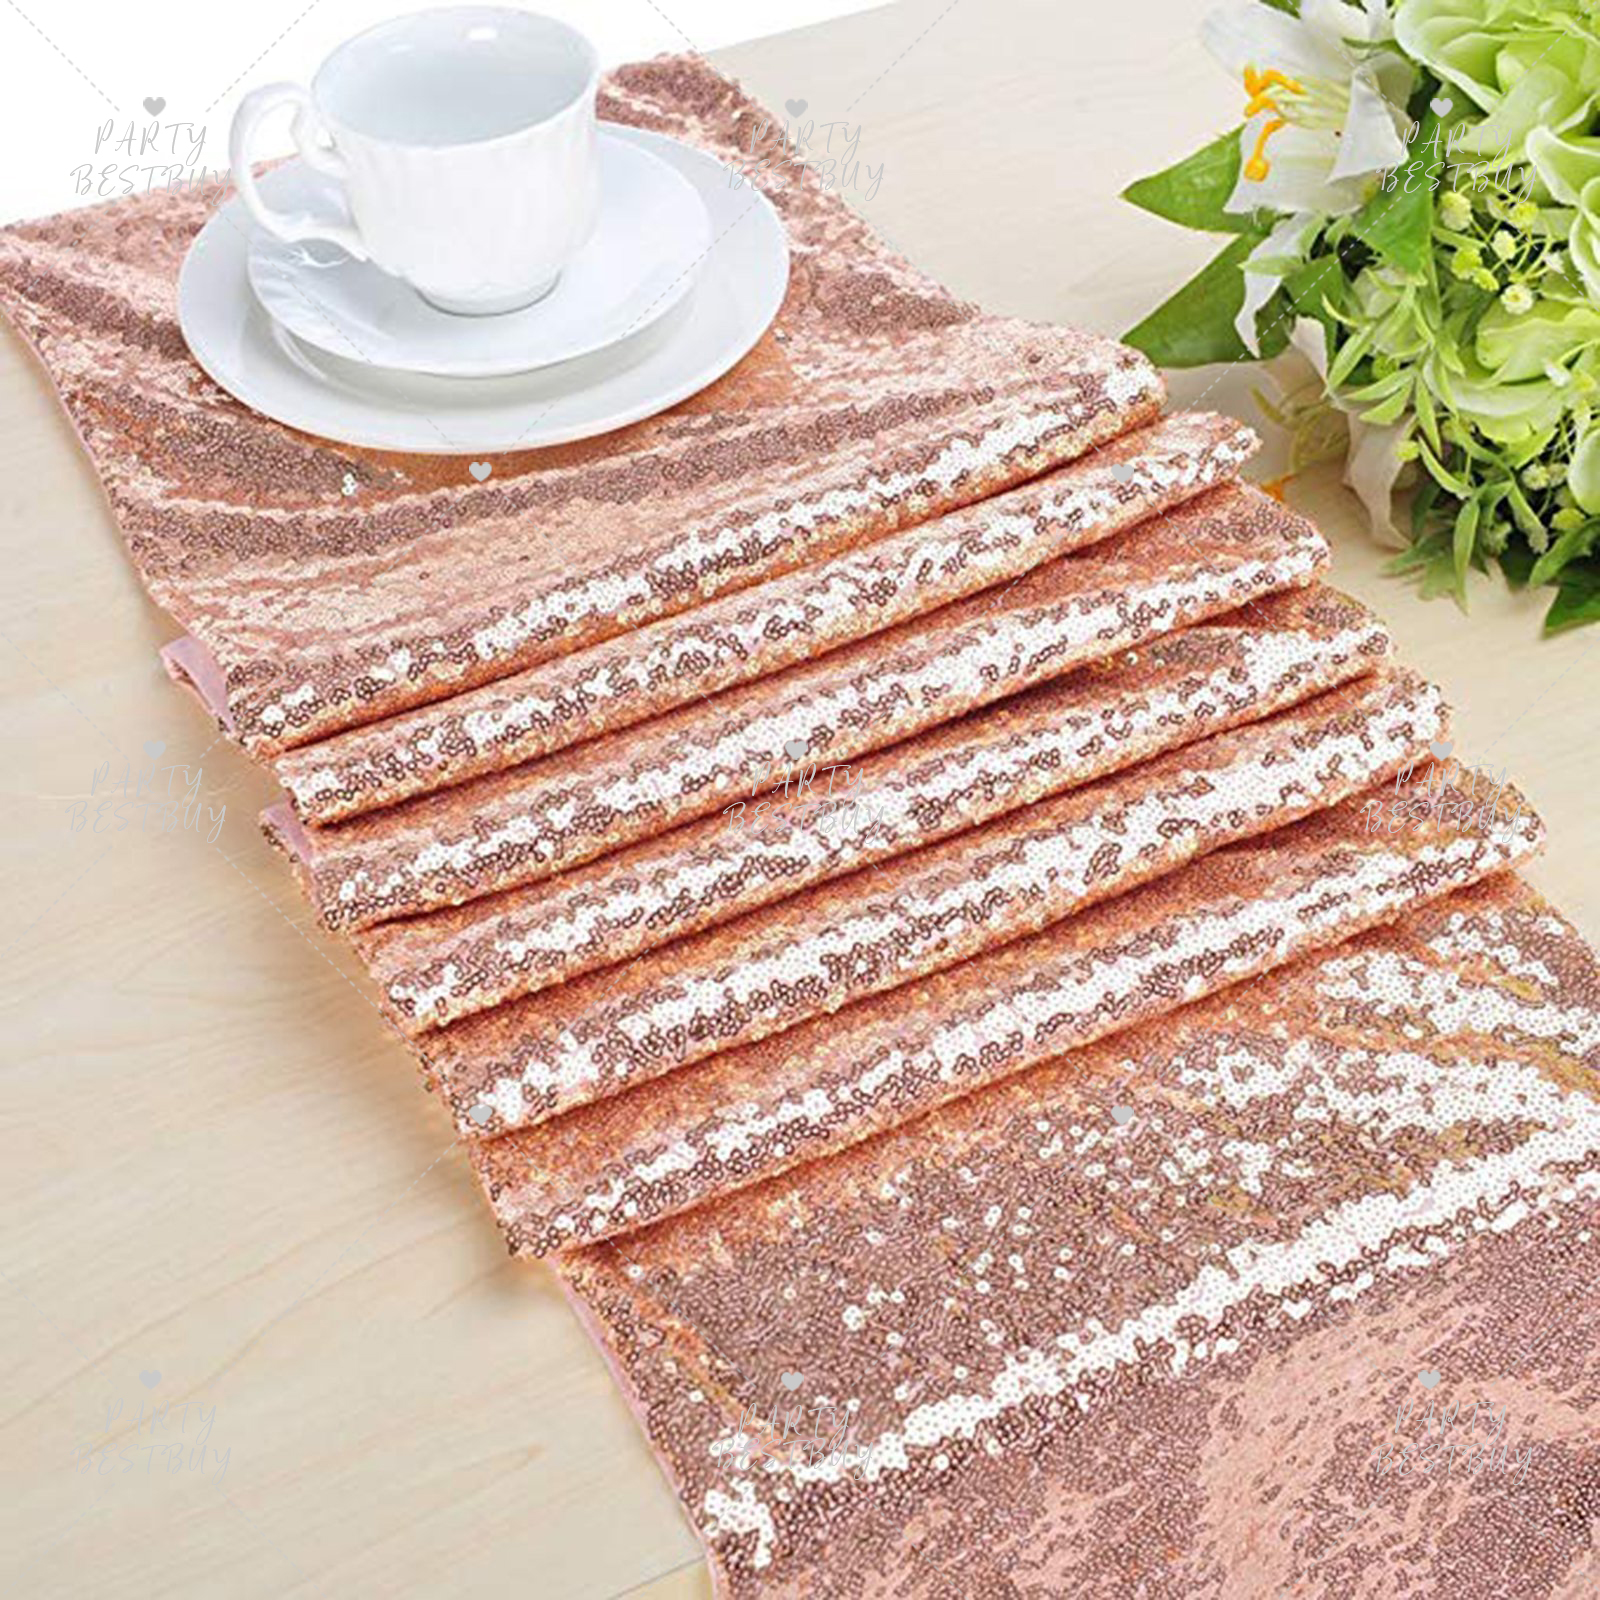 30x180cm Bulk Sequin Table Runners Wedding Party Bling Tablecloths ...